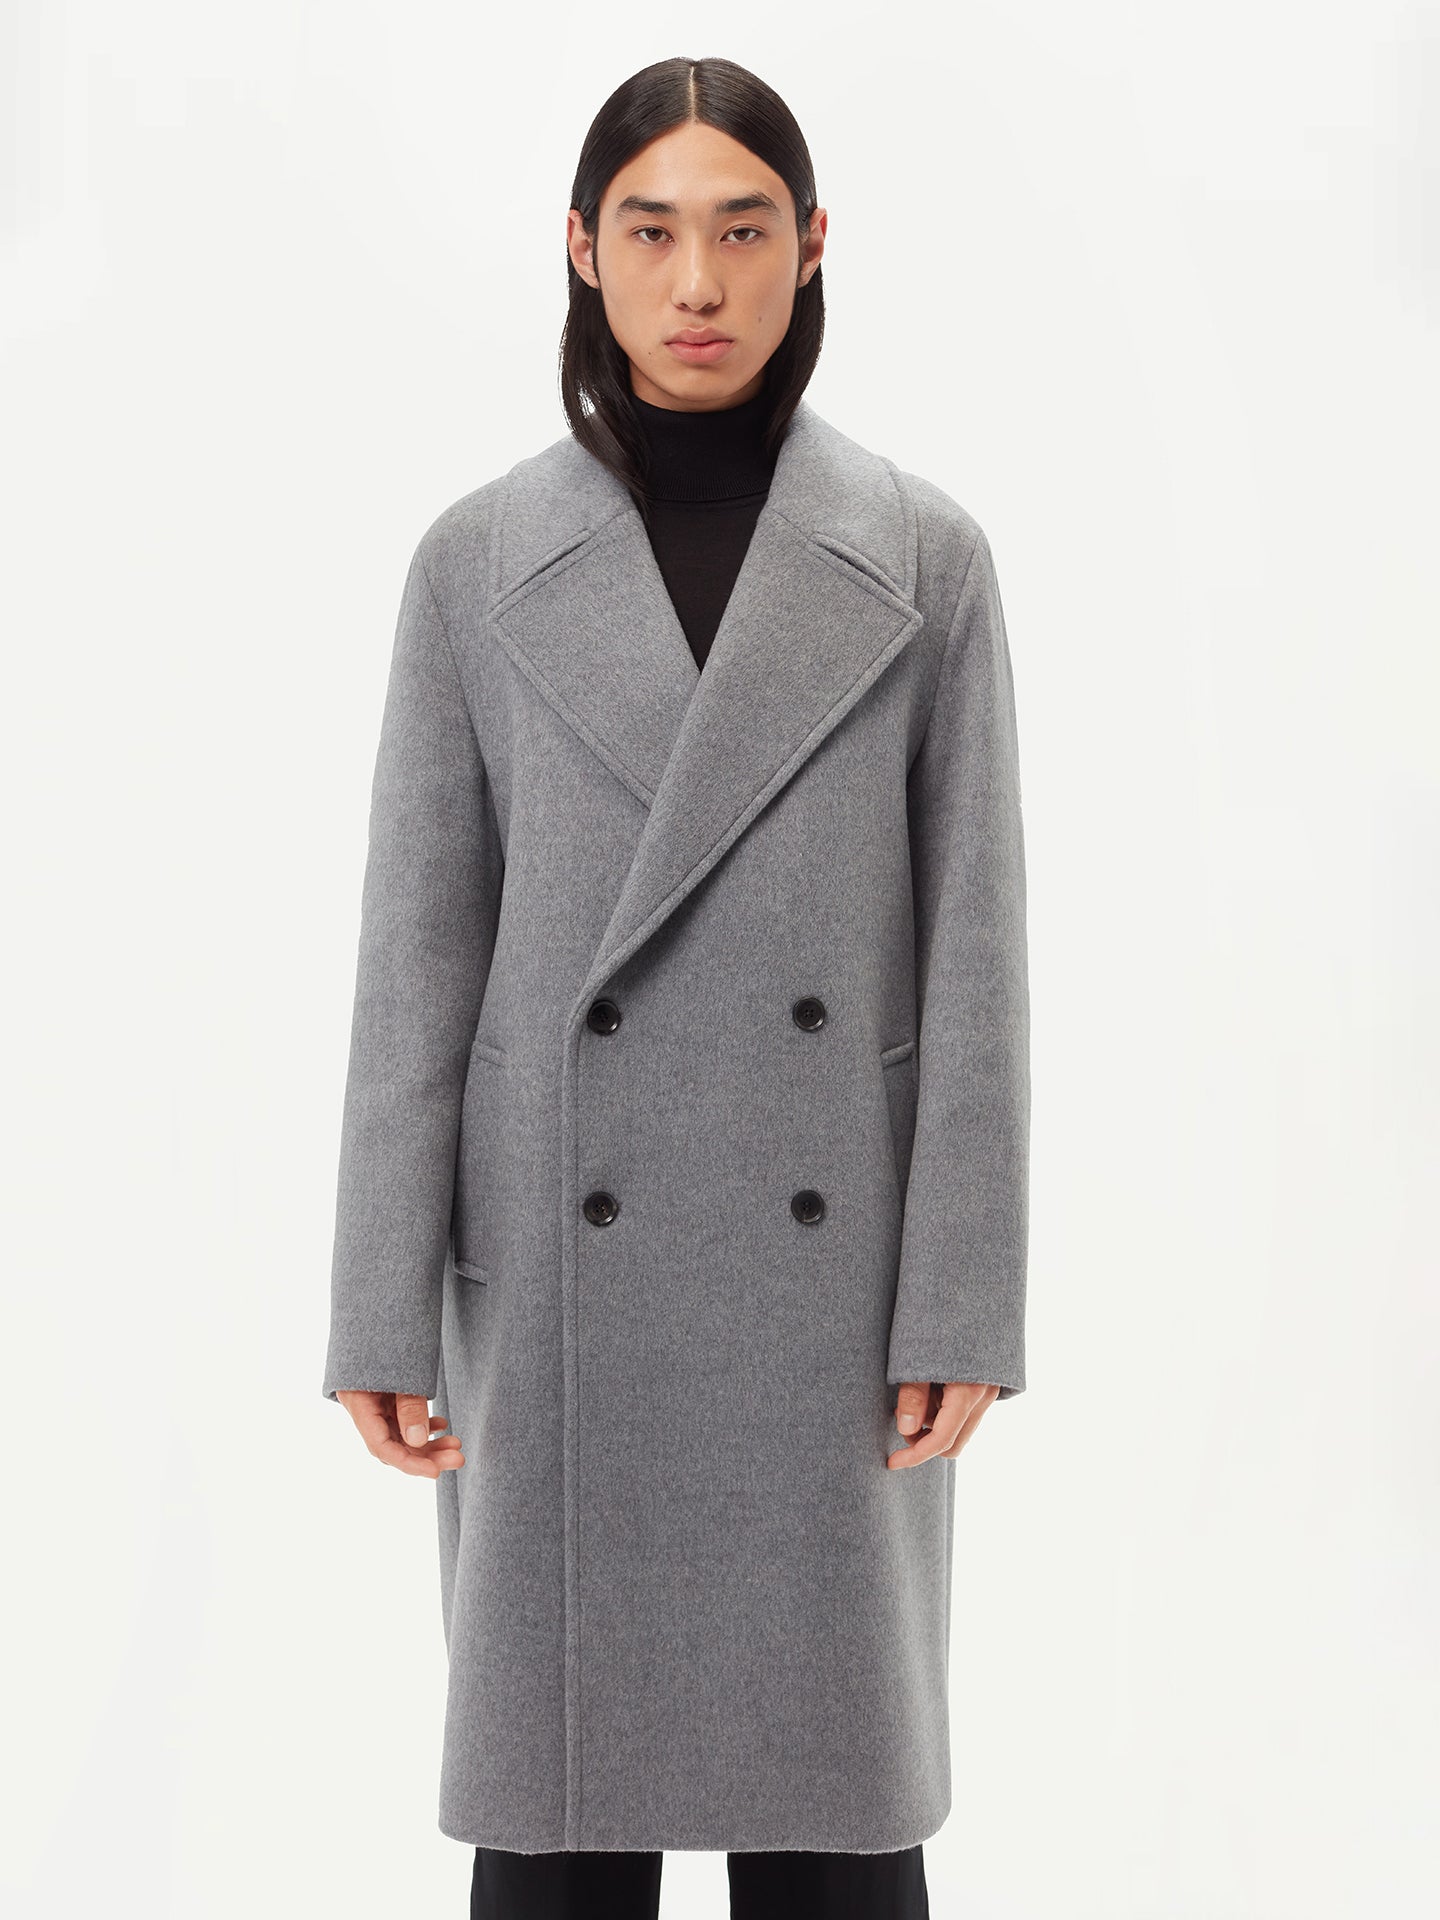 Double-Breasted Cashmere Coat for Men Dim Gray - Gobi Cashmere